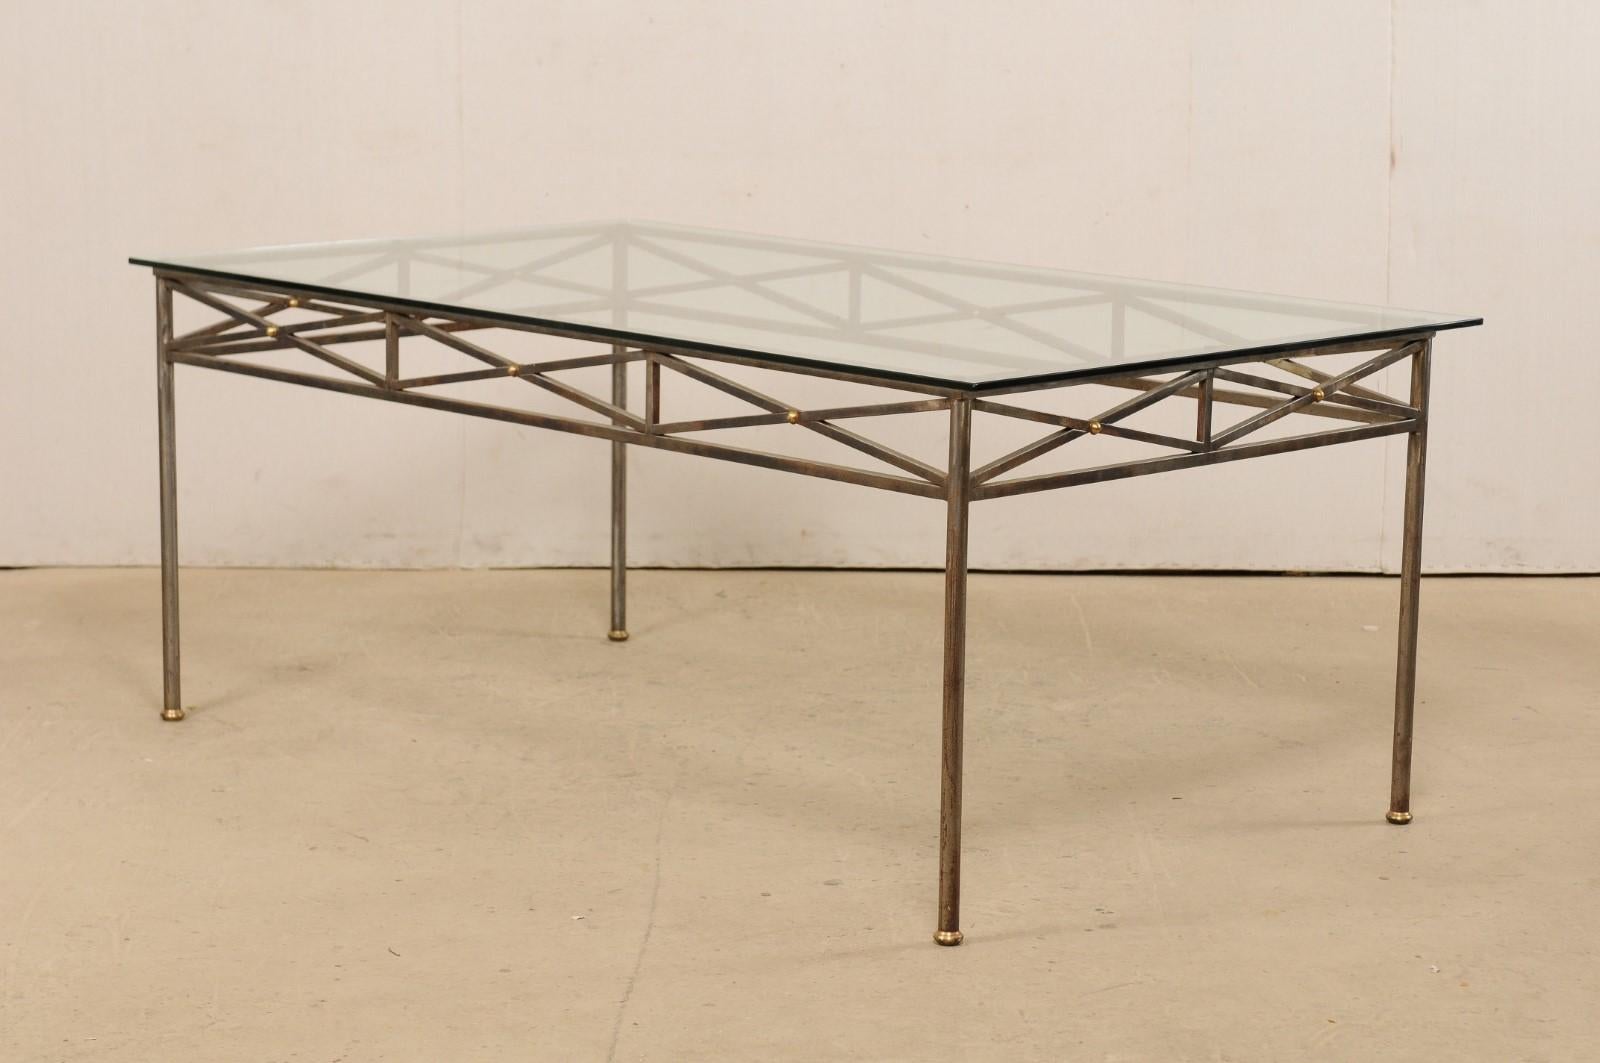 Neoclassical Inspired Metal Dining Table with Brass Accents and Glass Top For Sale 1